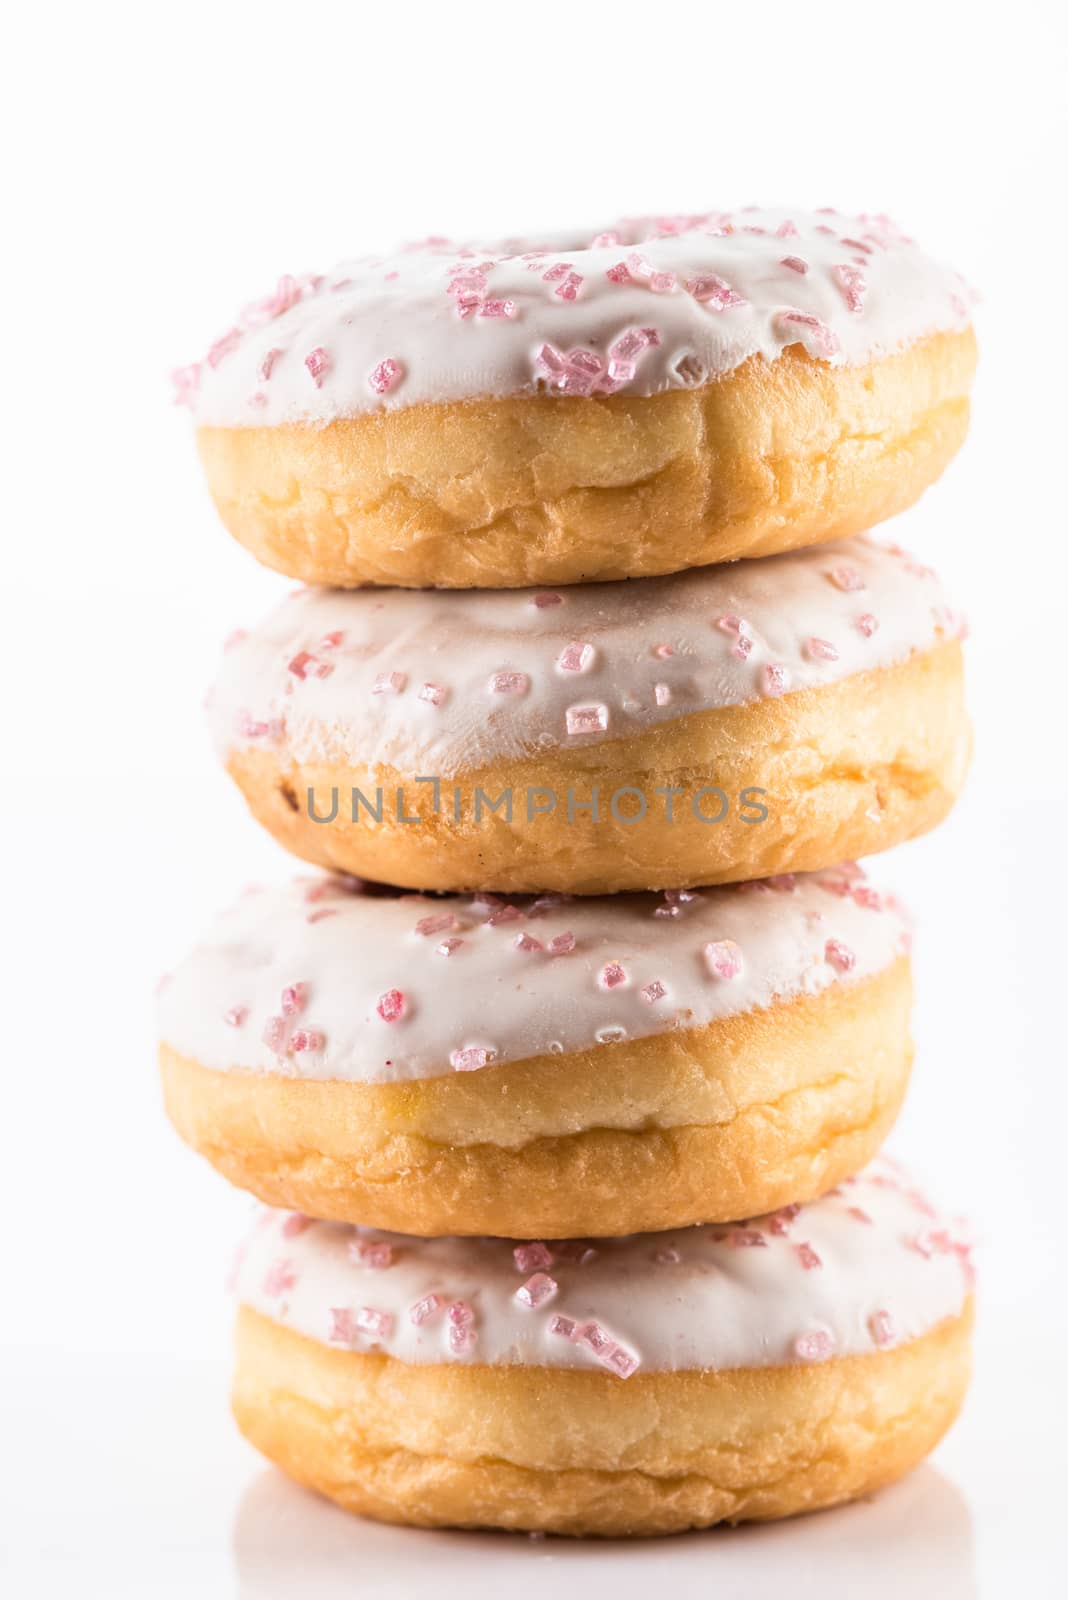 White Chocolate  Donut or Dougnut Tower on White Background by merc67